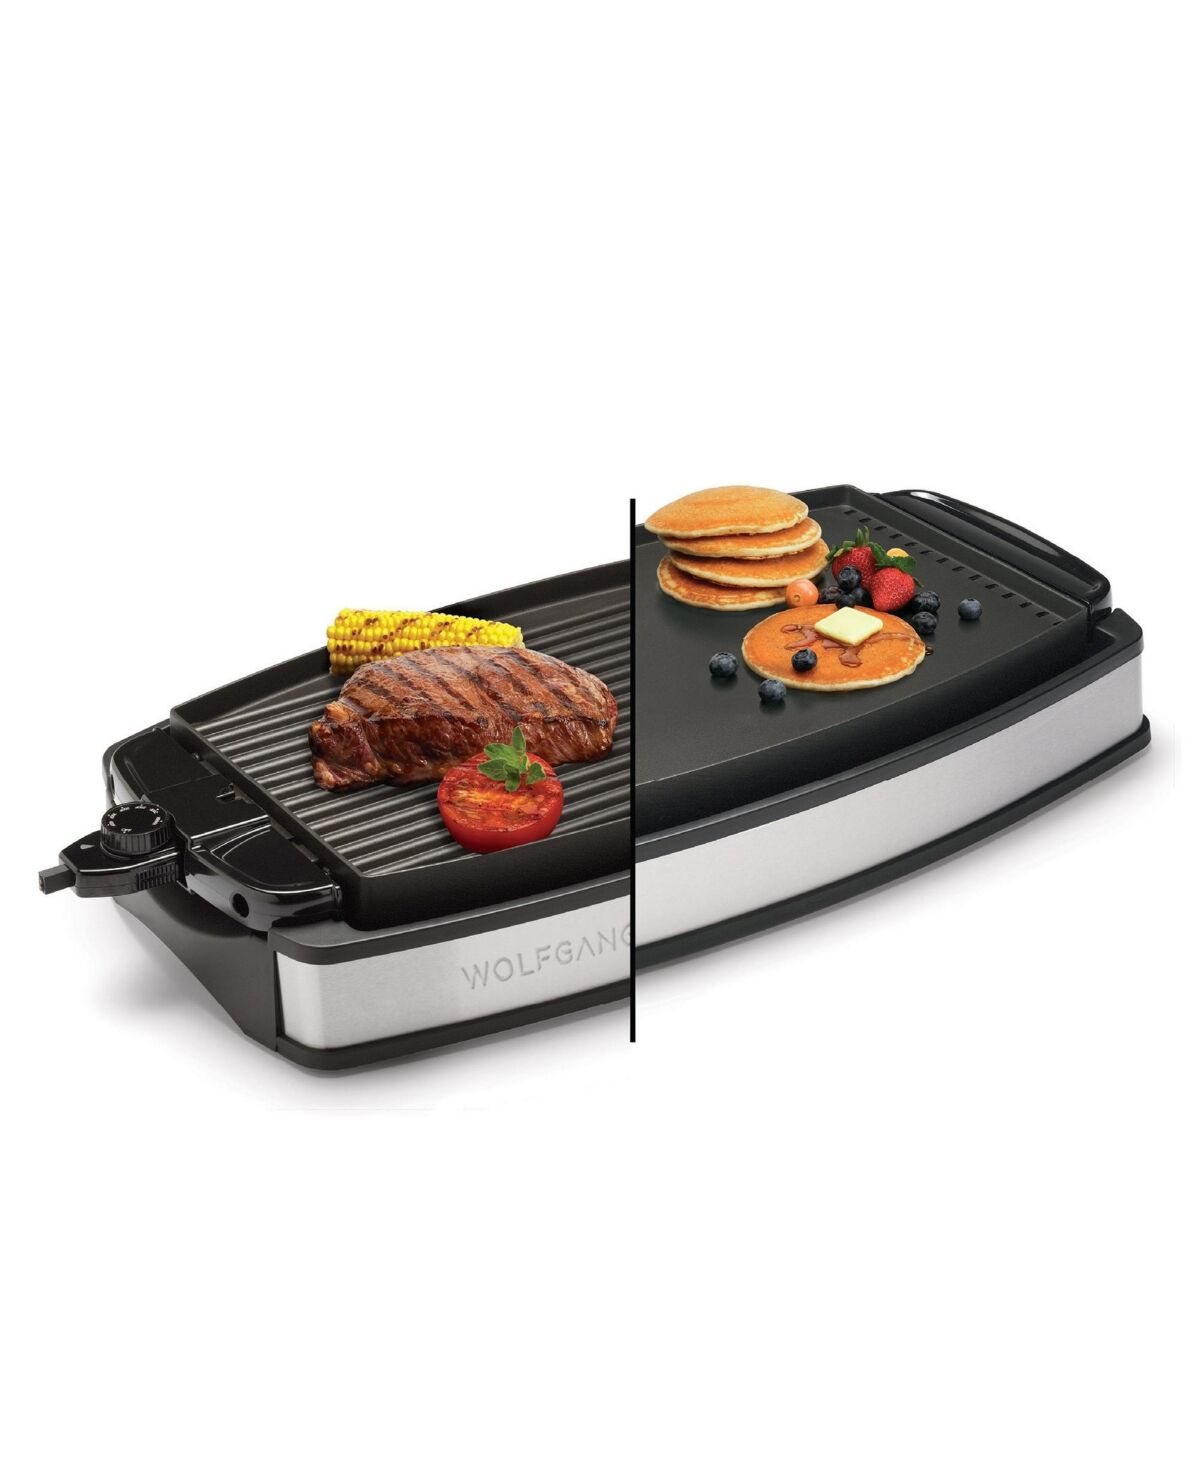 Wolfgang Puck Xl Reversible Grill Griddle, Oversized Removable Cooking Plate, Nonstick Coating, Dishwasher Safe, Heats Up to 400ºF, Stay Cool Handles